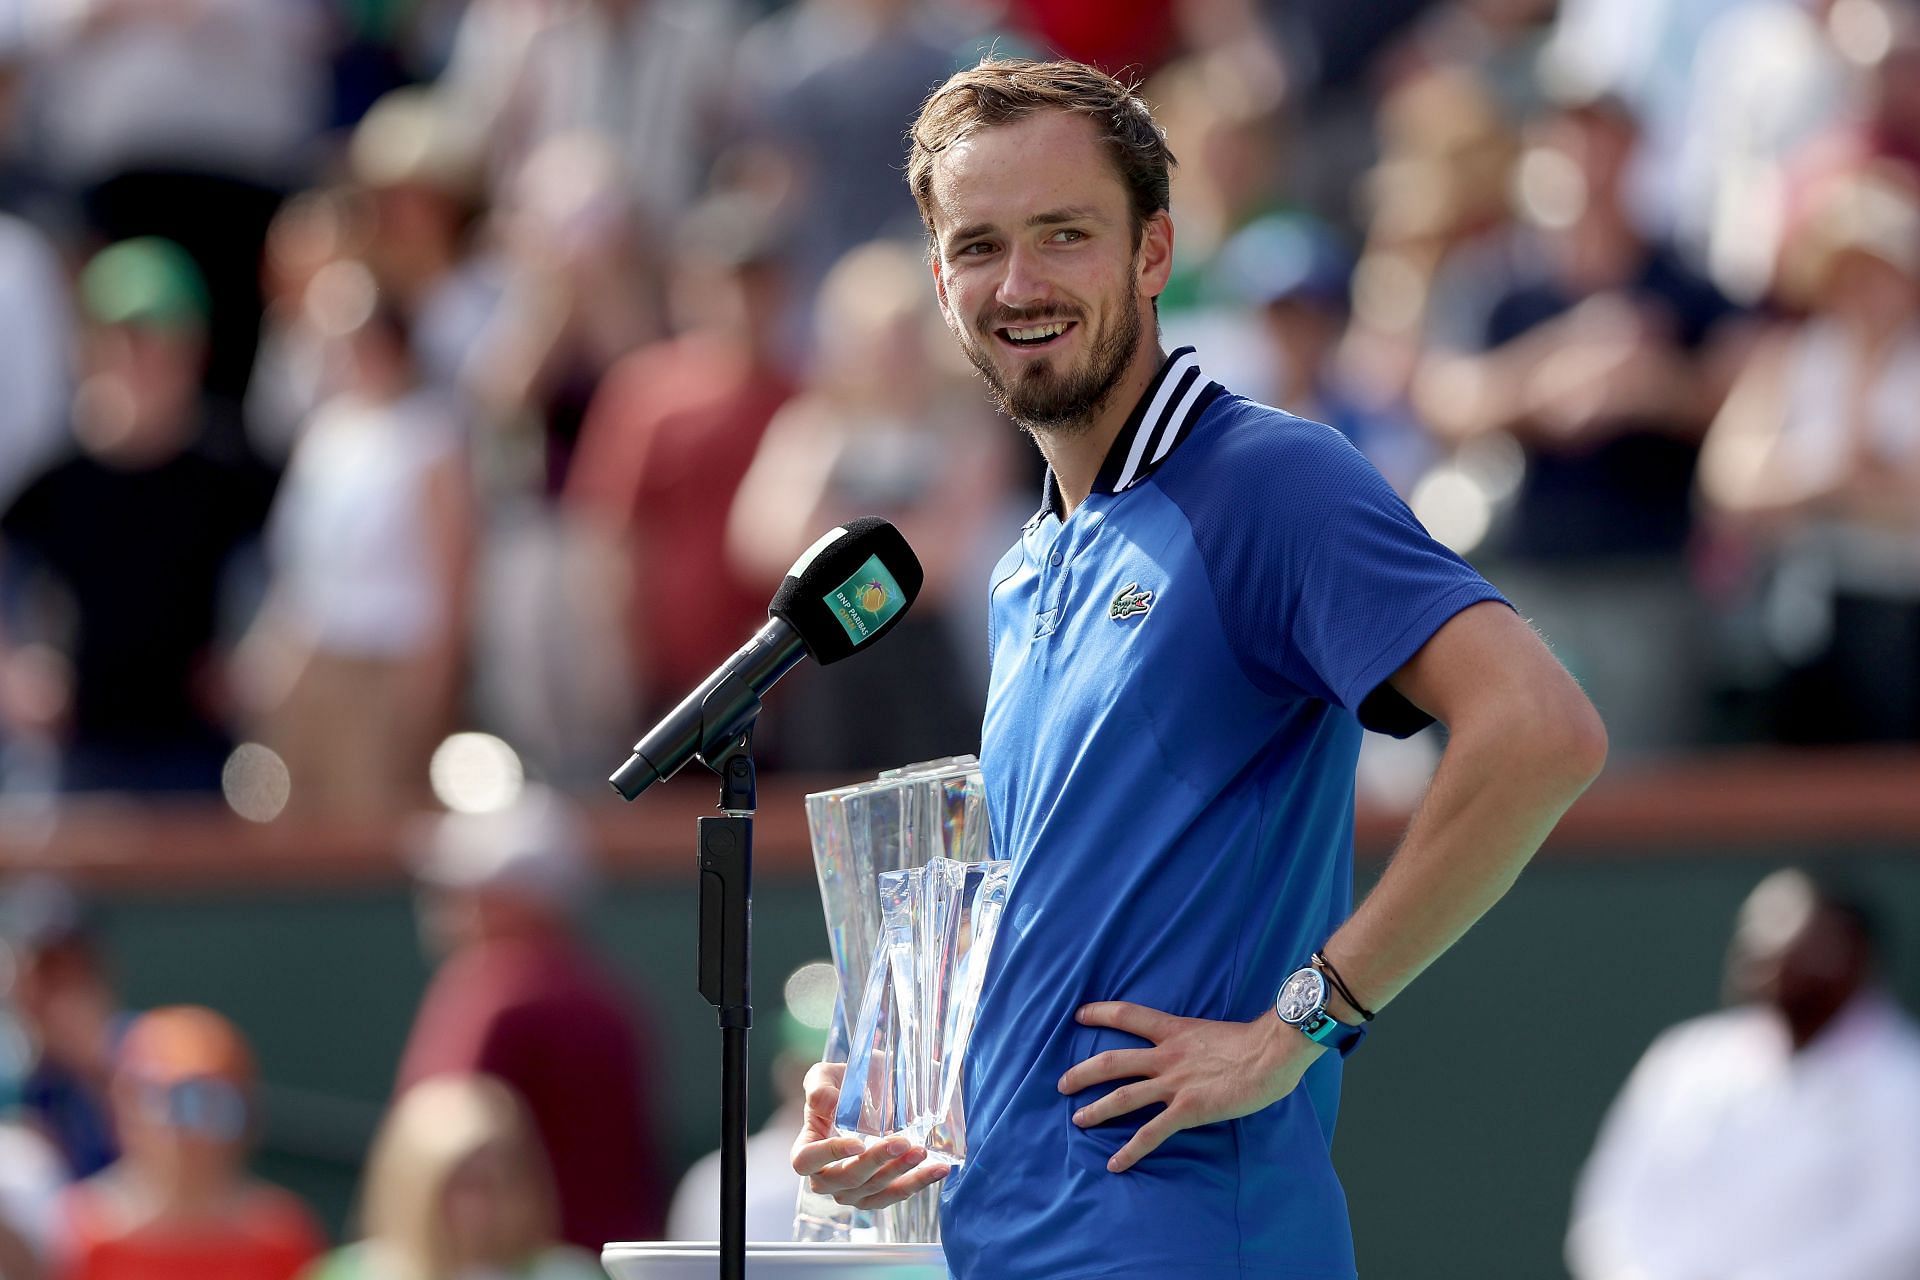 Daniil Medvedev during the presentation ceremony after losing the Indian Wells final to Carlos Alcaraz